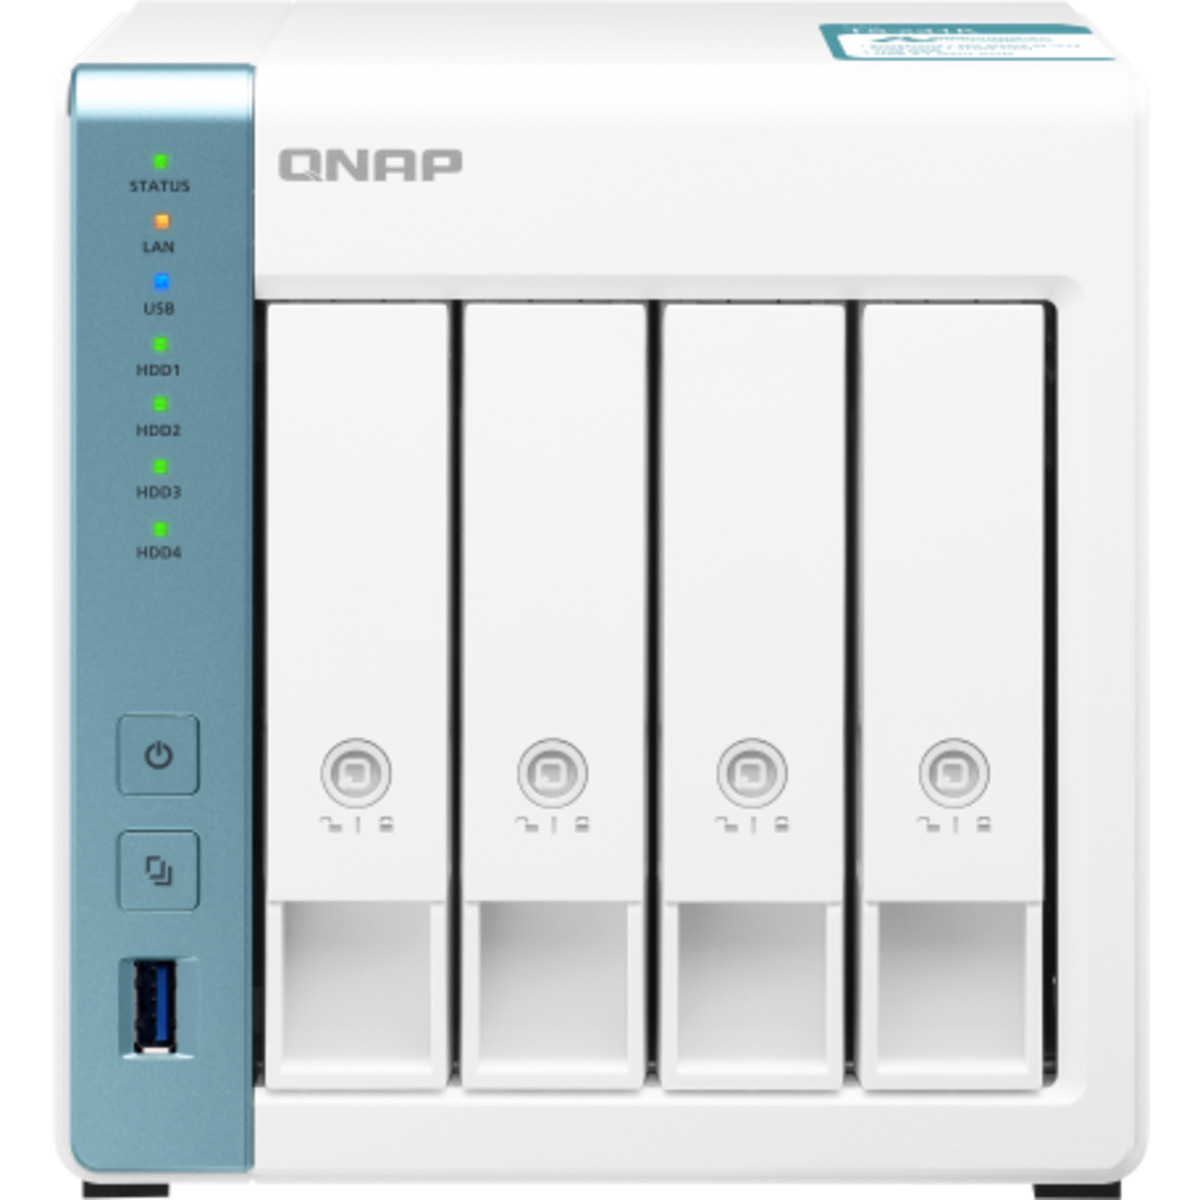 buy $979 QNAP TS-431K 24tb Desktop NAS - Network Attached Storage Device 4x6000gb Western Digital Blue WD60EZAZ 3.5 5400rpm SATA 6Gb/s HDD CONSUMER Class Drives Installed - Burn-In Tested - nas headquarters buy network attached storage server device das new raid-5 free shipping usa christmas new year holiday sale TS-431K